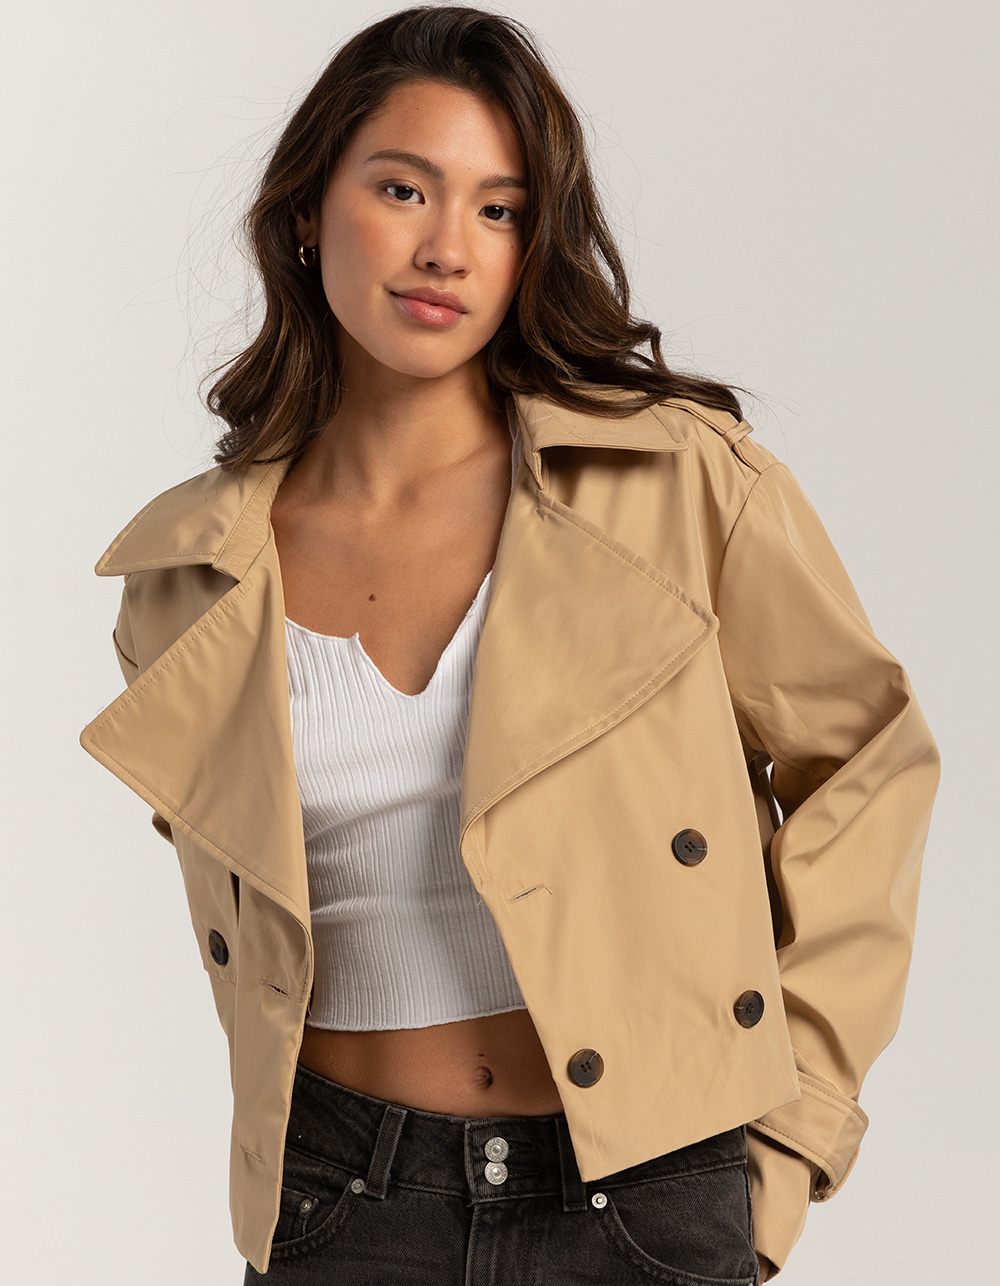 Freq G Hooded Crop Jacket - Leather  Leather jacket, Cropped leather jacket,  Celebrities leather jacket